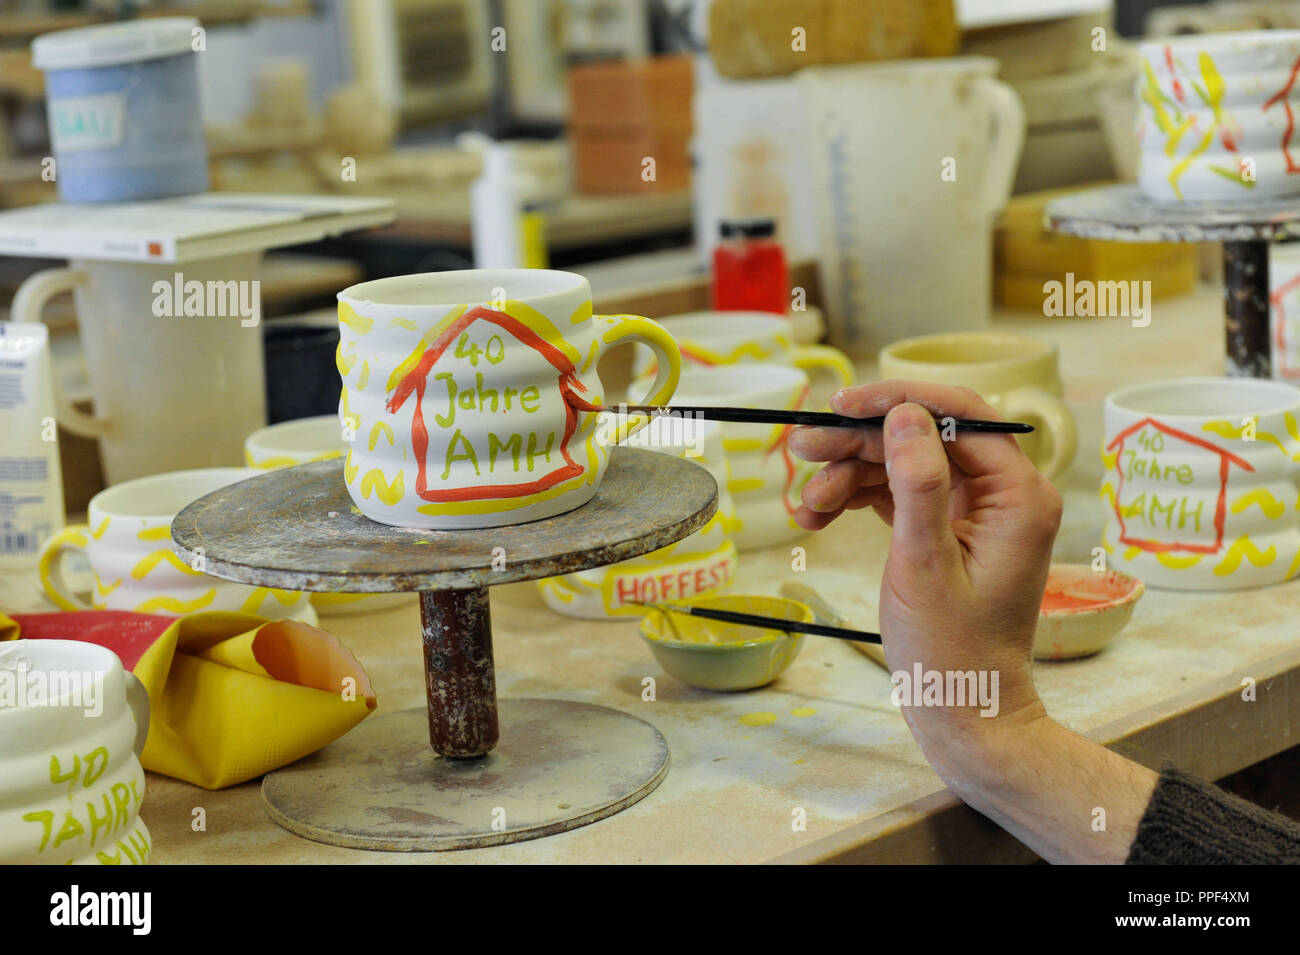 In the pottery workshop at the Adolf-Mathes-Haus of the Catholic Men's Welfare Association (KMFV). The AMH is a facility for homeless people in the Hans-Sachs-Strasse 16, and this year celebrates its 40th anniversary. Stock Photo